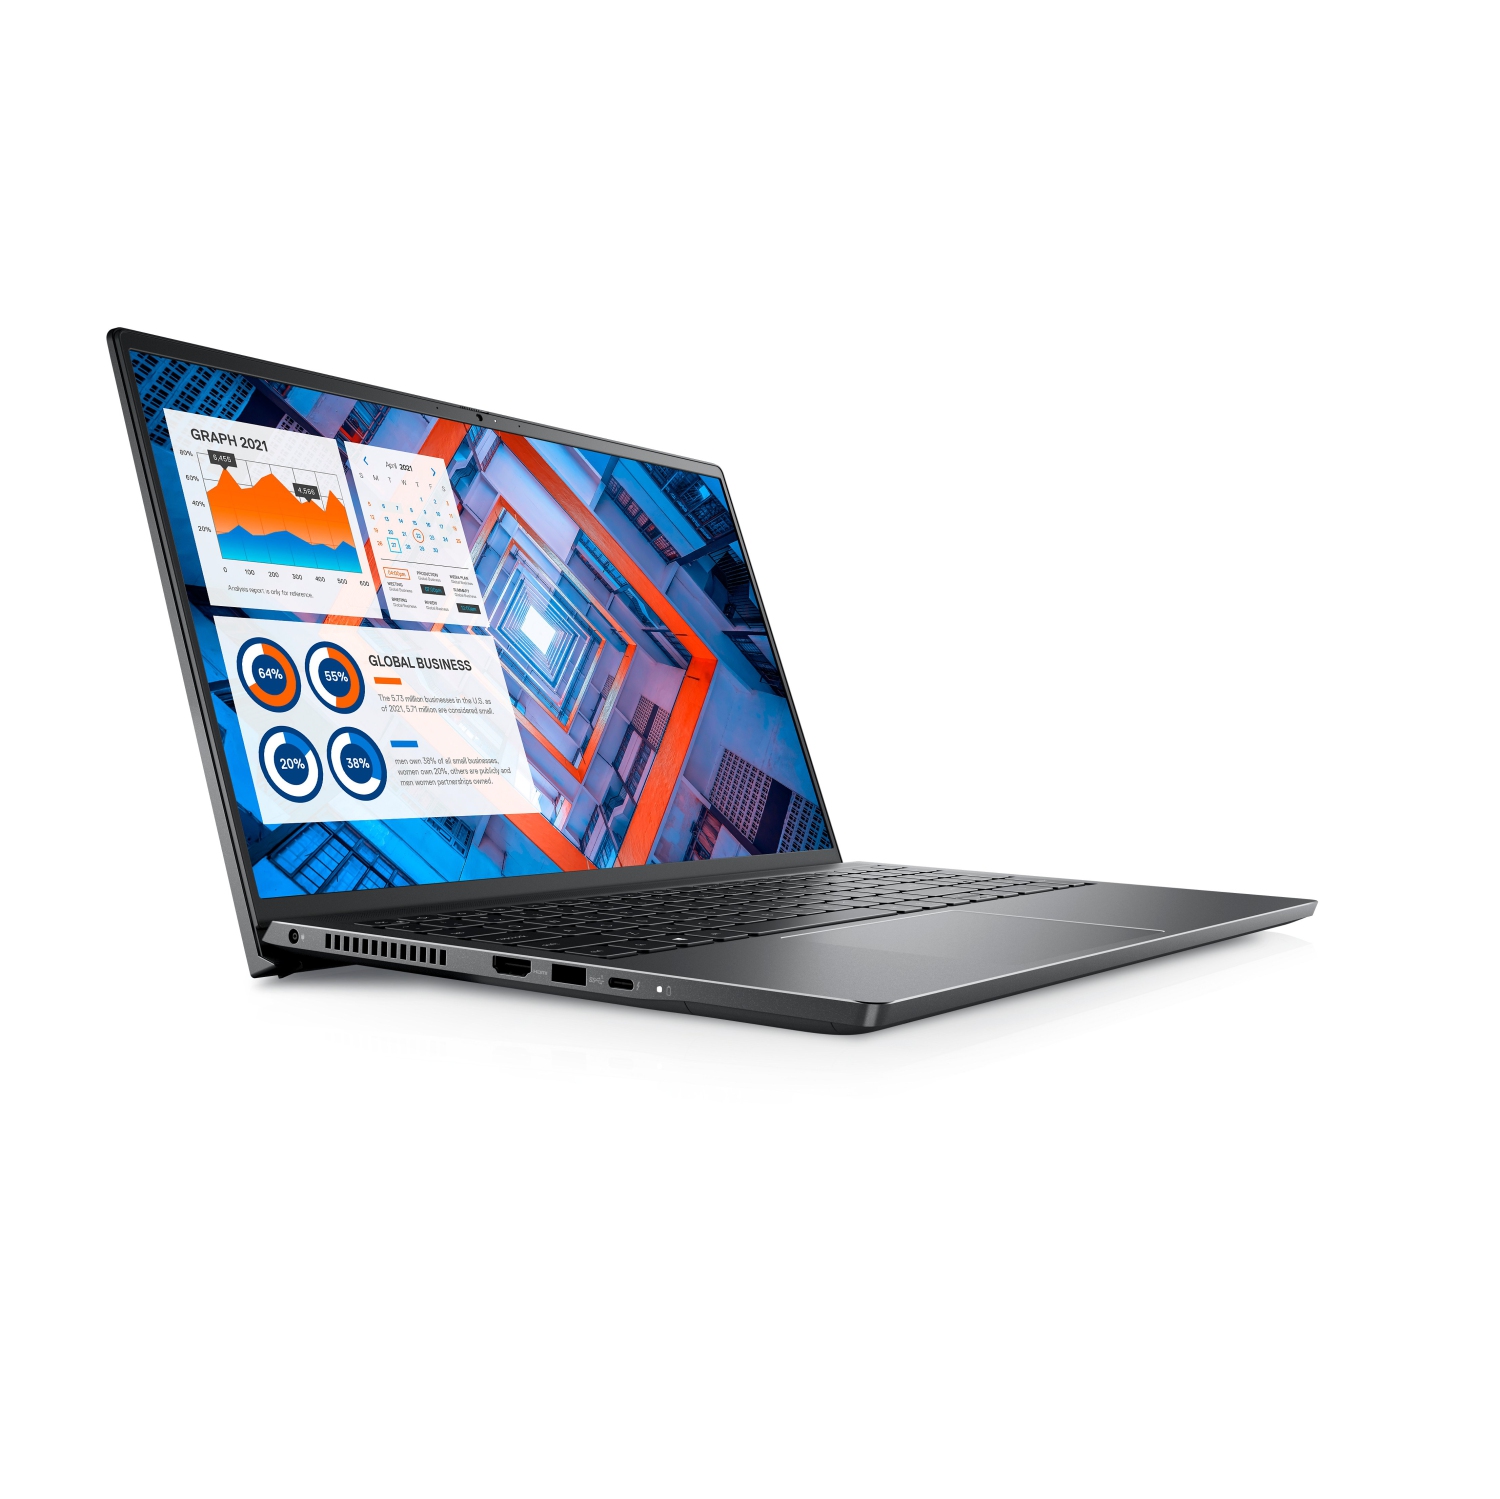 Refurbished (Excellent) - Dell Vostro 15 7510 Laptop (2021), 15.6" FHD, Core i7 - 512GB SSD - 16GB RAM - RTX 3050, 8 Cores @ 4.6 GHz - 11th Gen CPU Certified Refurbished